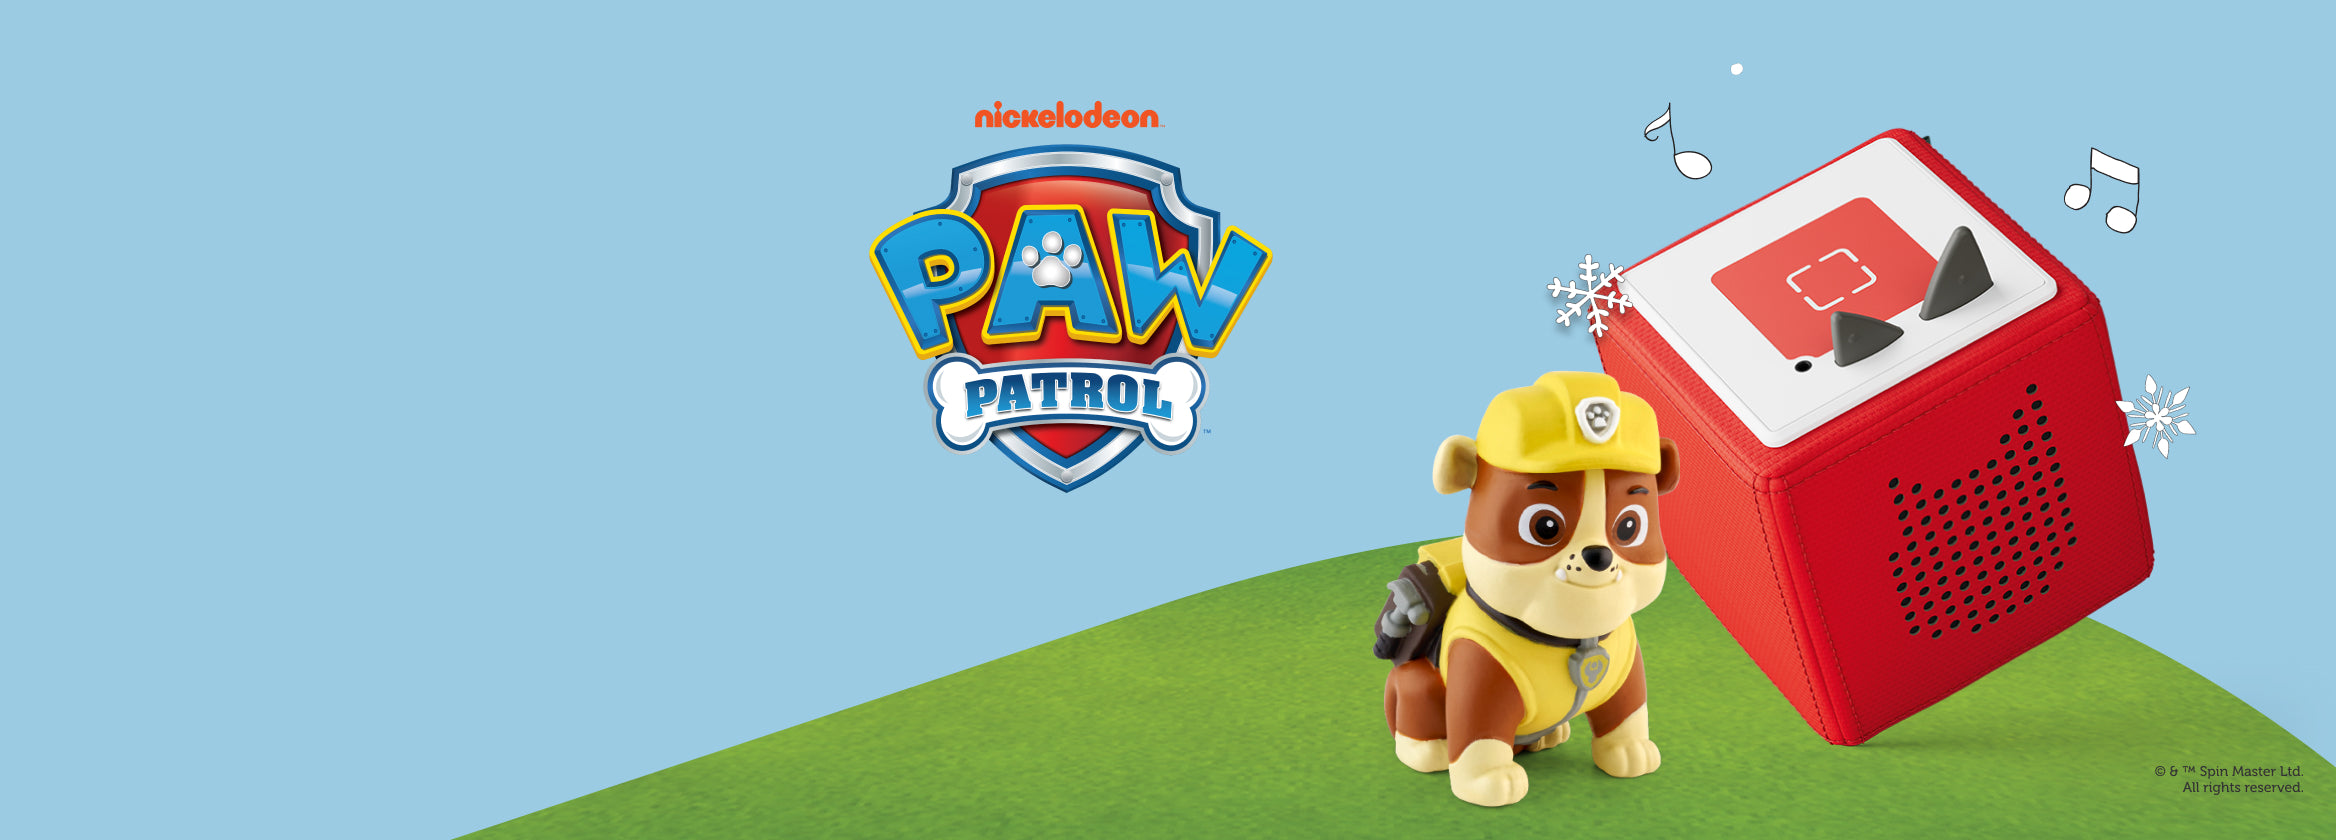 Paw Patrol Rubble Tonie with a red Toniebox